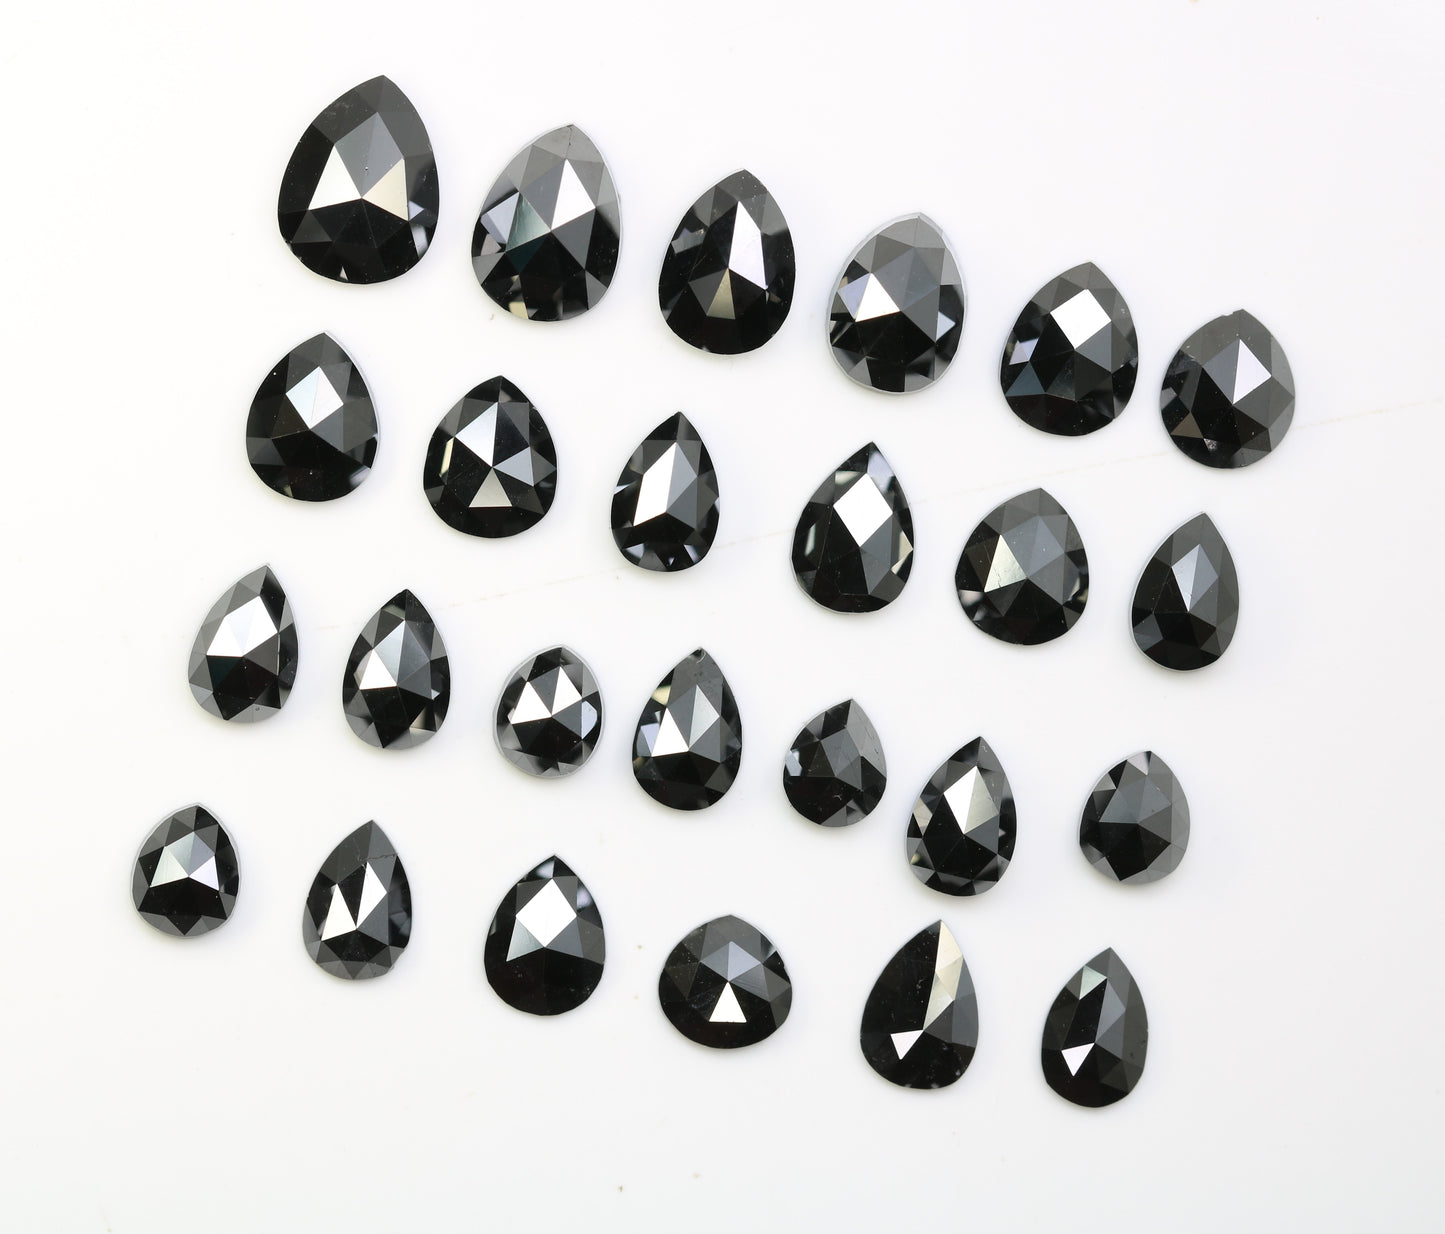 0.30 CT To 1.16 CT Pear Cut Black Diamond For Engagement Ring